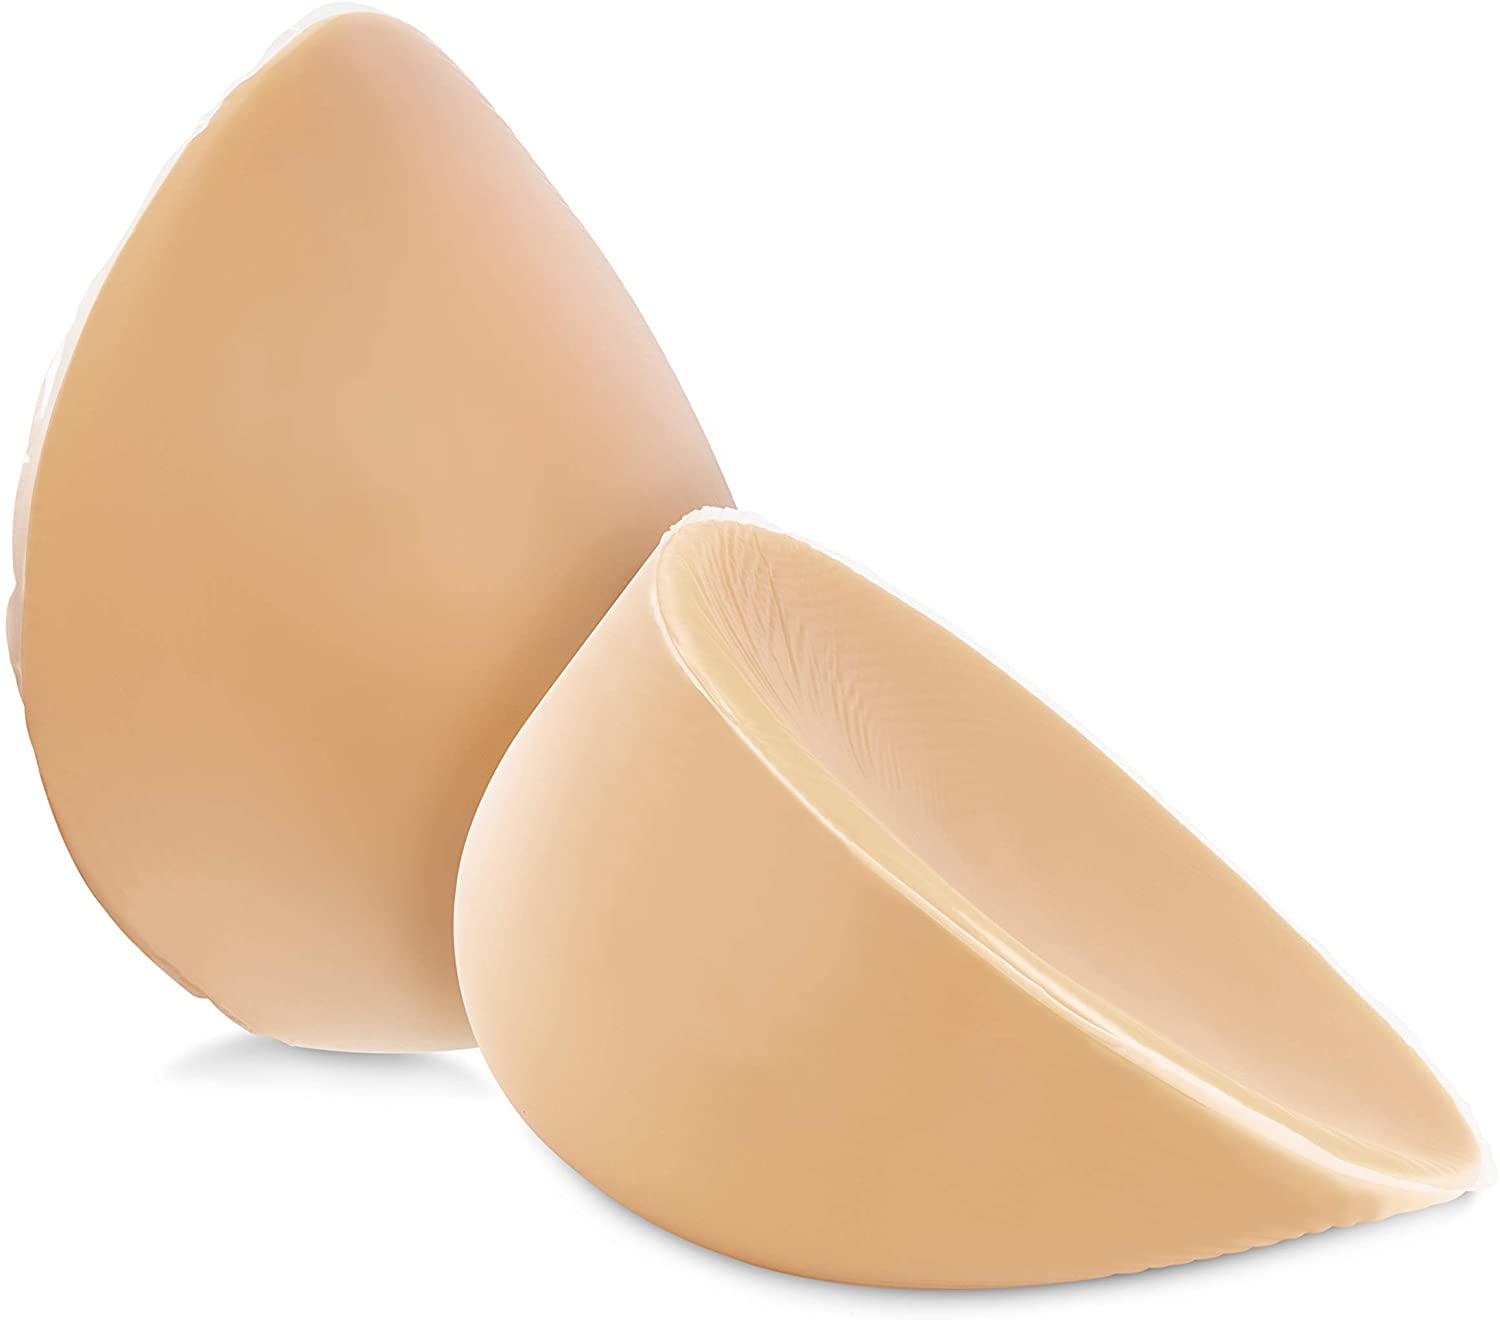 Feminique Silicone Breast Forms for Mastectomy, DDD Cup (6000g) Suntan